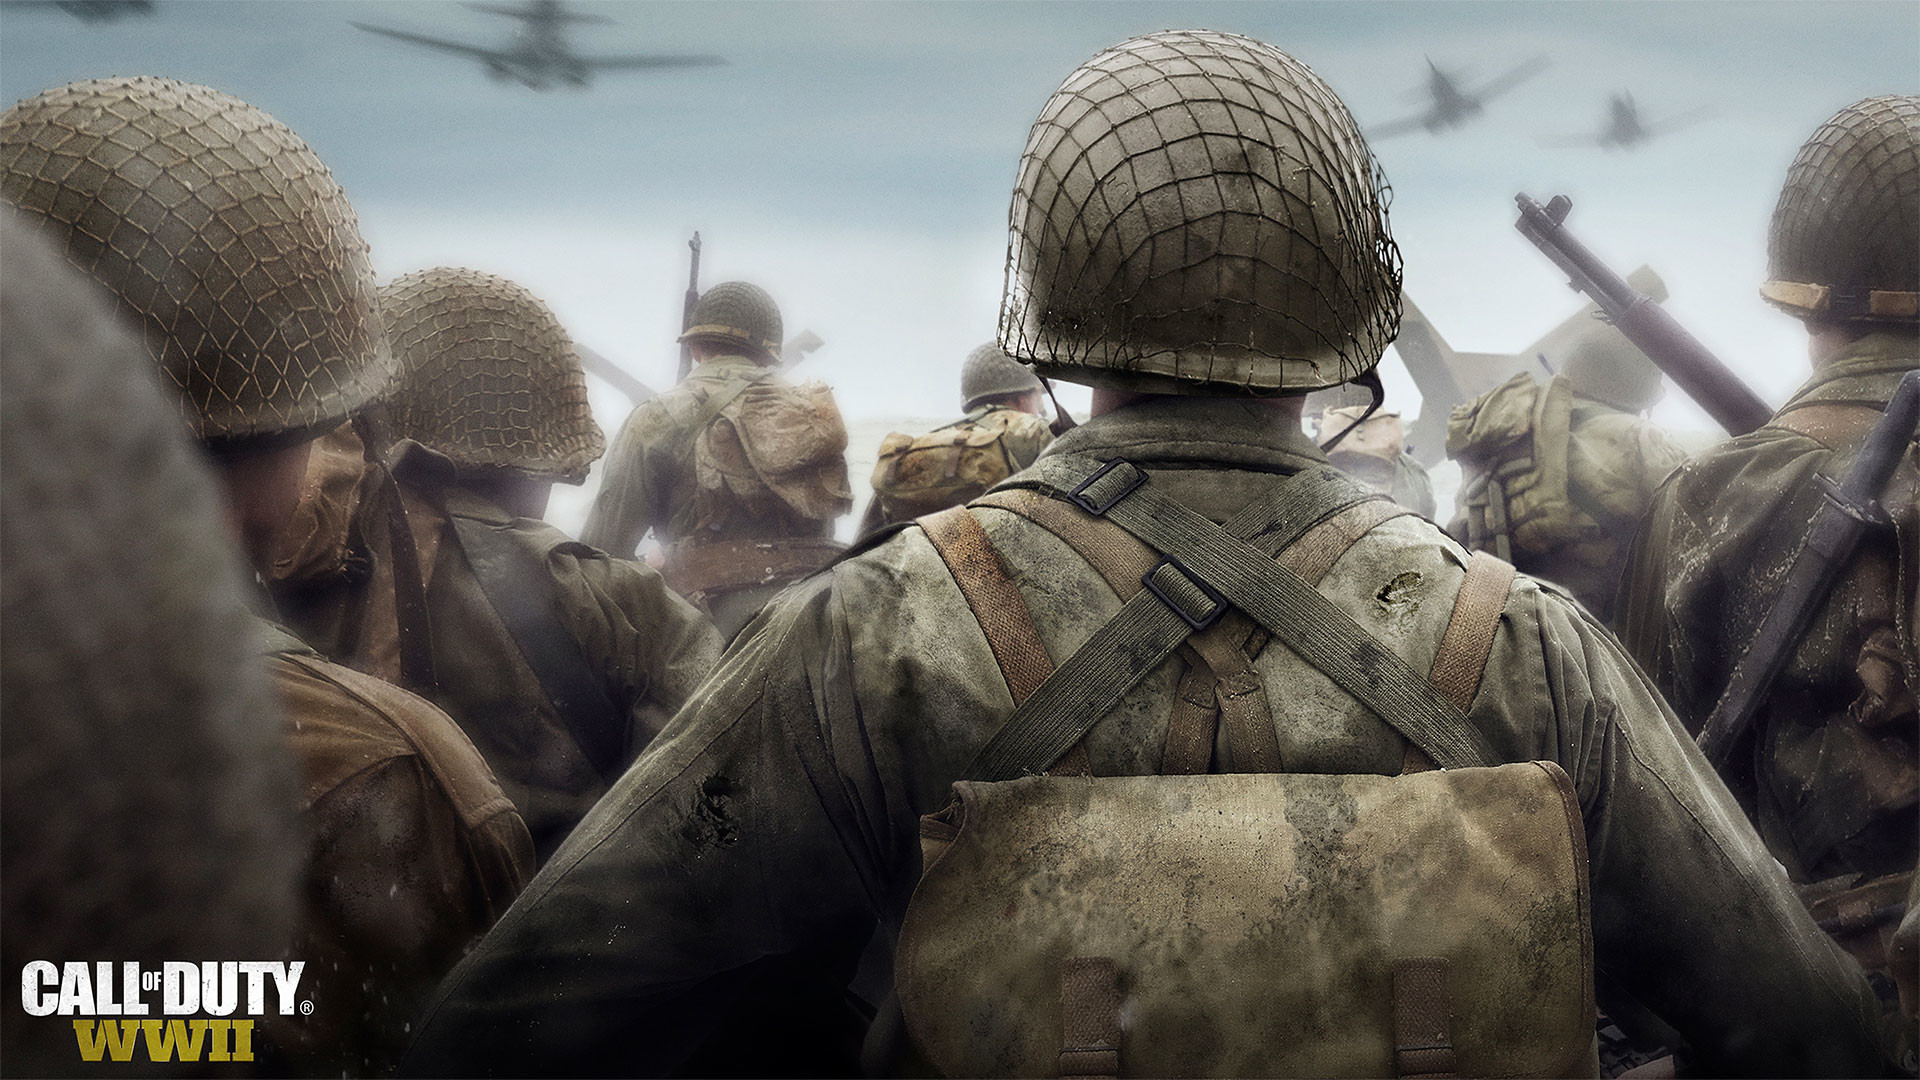 1920x1080 ... CALL OF DUTY WWII 720p Wallpaper